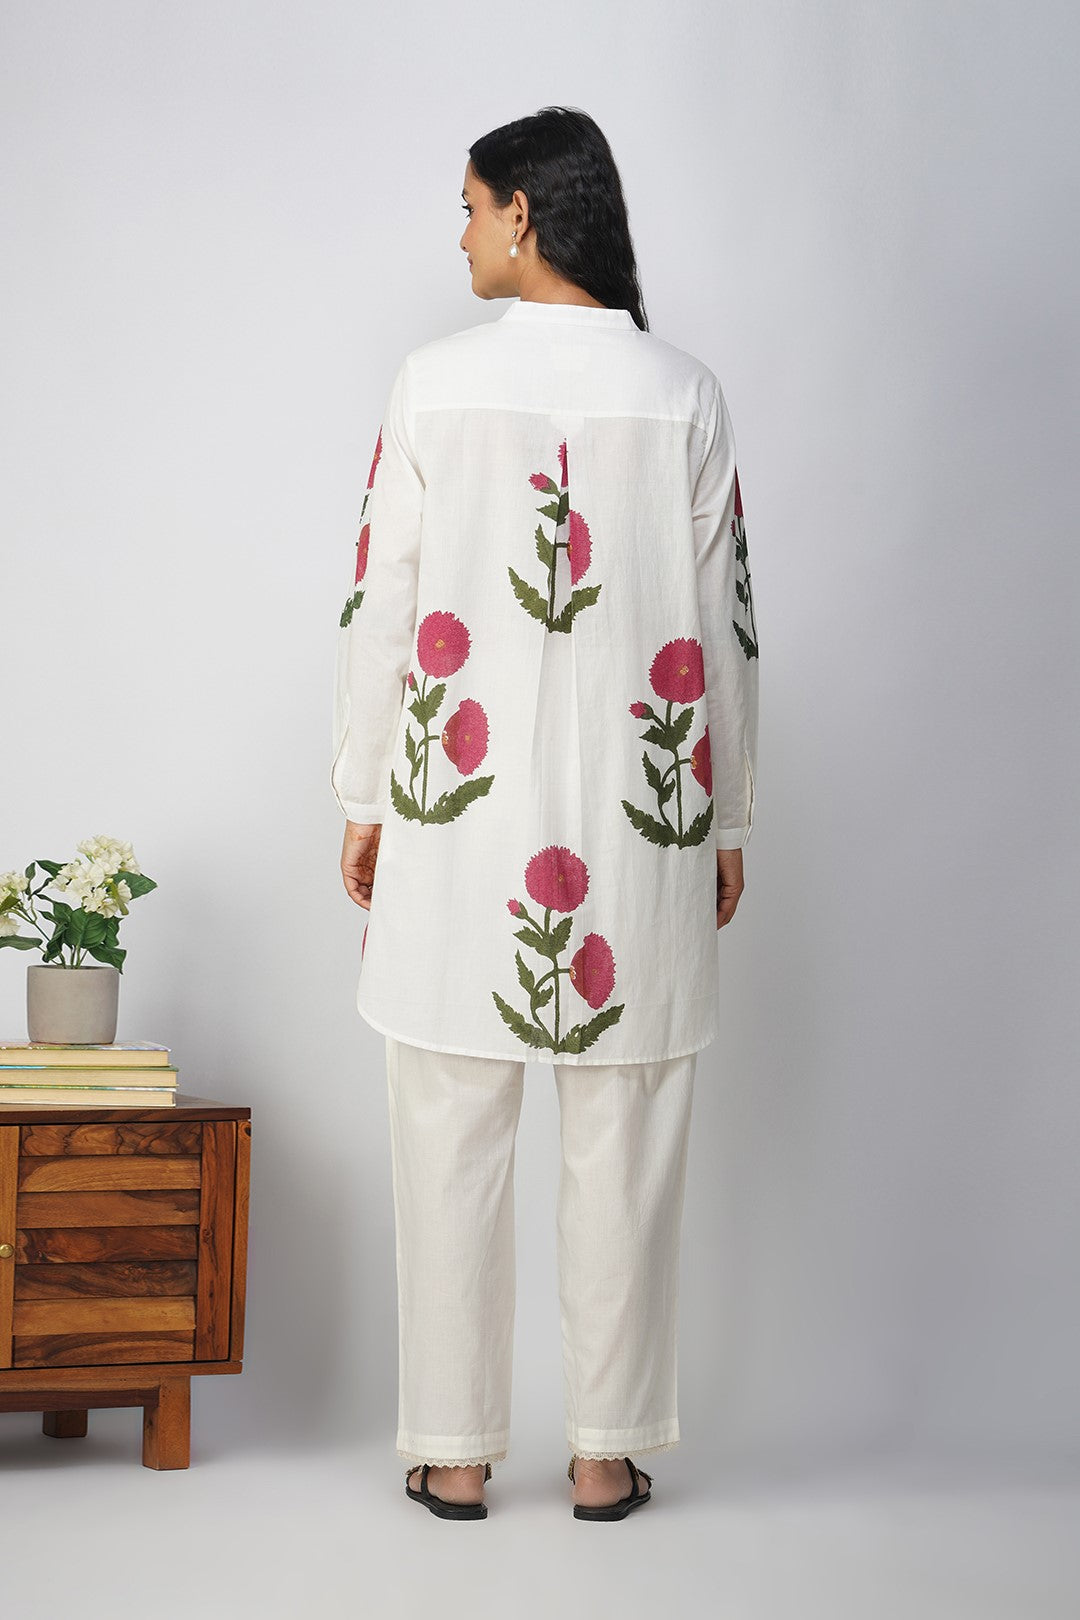 White Tunic with Red floral print and Lace Pants